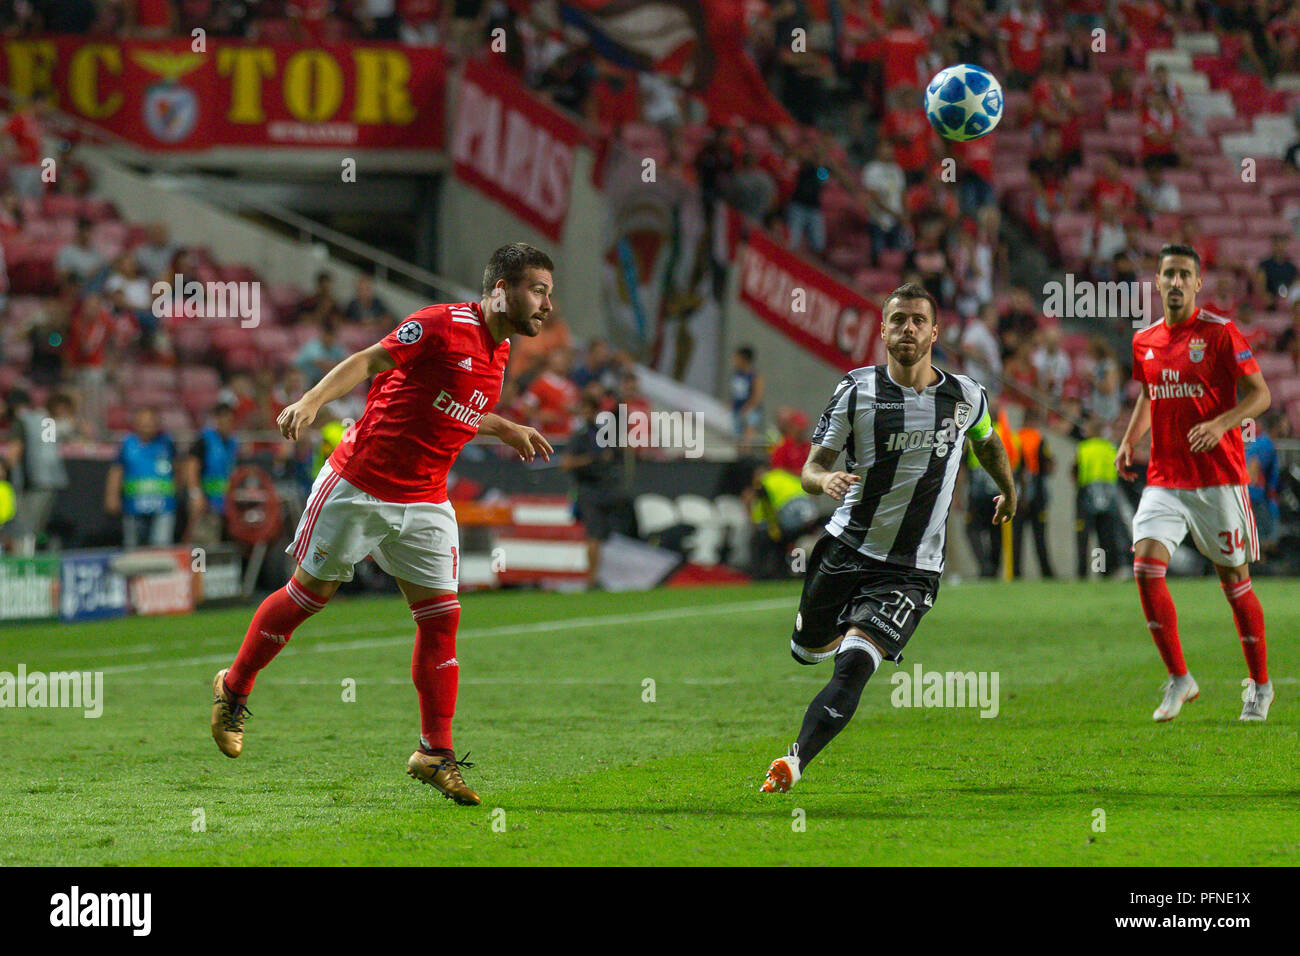 Lisbon, Portugal. August 21, 2018. Benfica's forward from Serbia Andrika Zivkovic (17) and PAOK's defender from Portugal Vieirinha (20) during the game of the 1st leg of the Playoffs of the UEFA Champions League, SL Benfica vs PAOK © Alexandre de Sousa/Alamy Live News Stock Photo